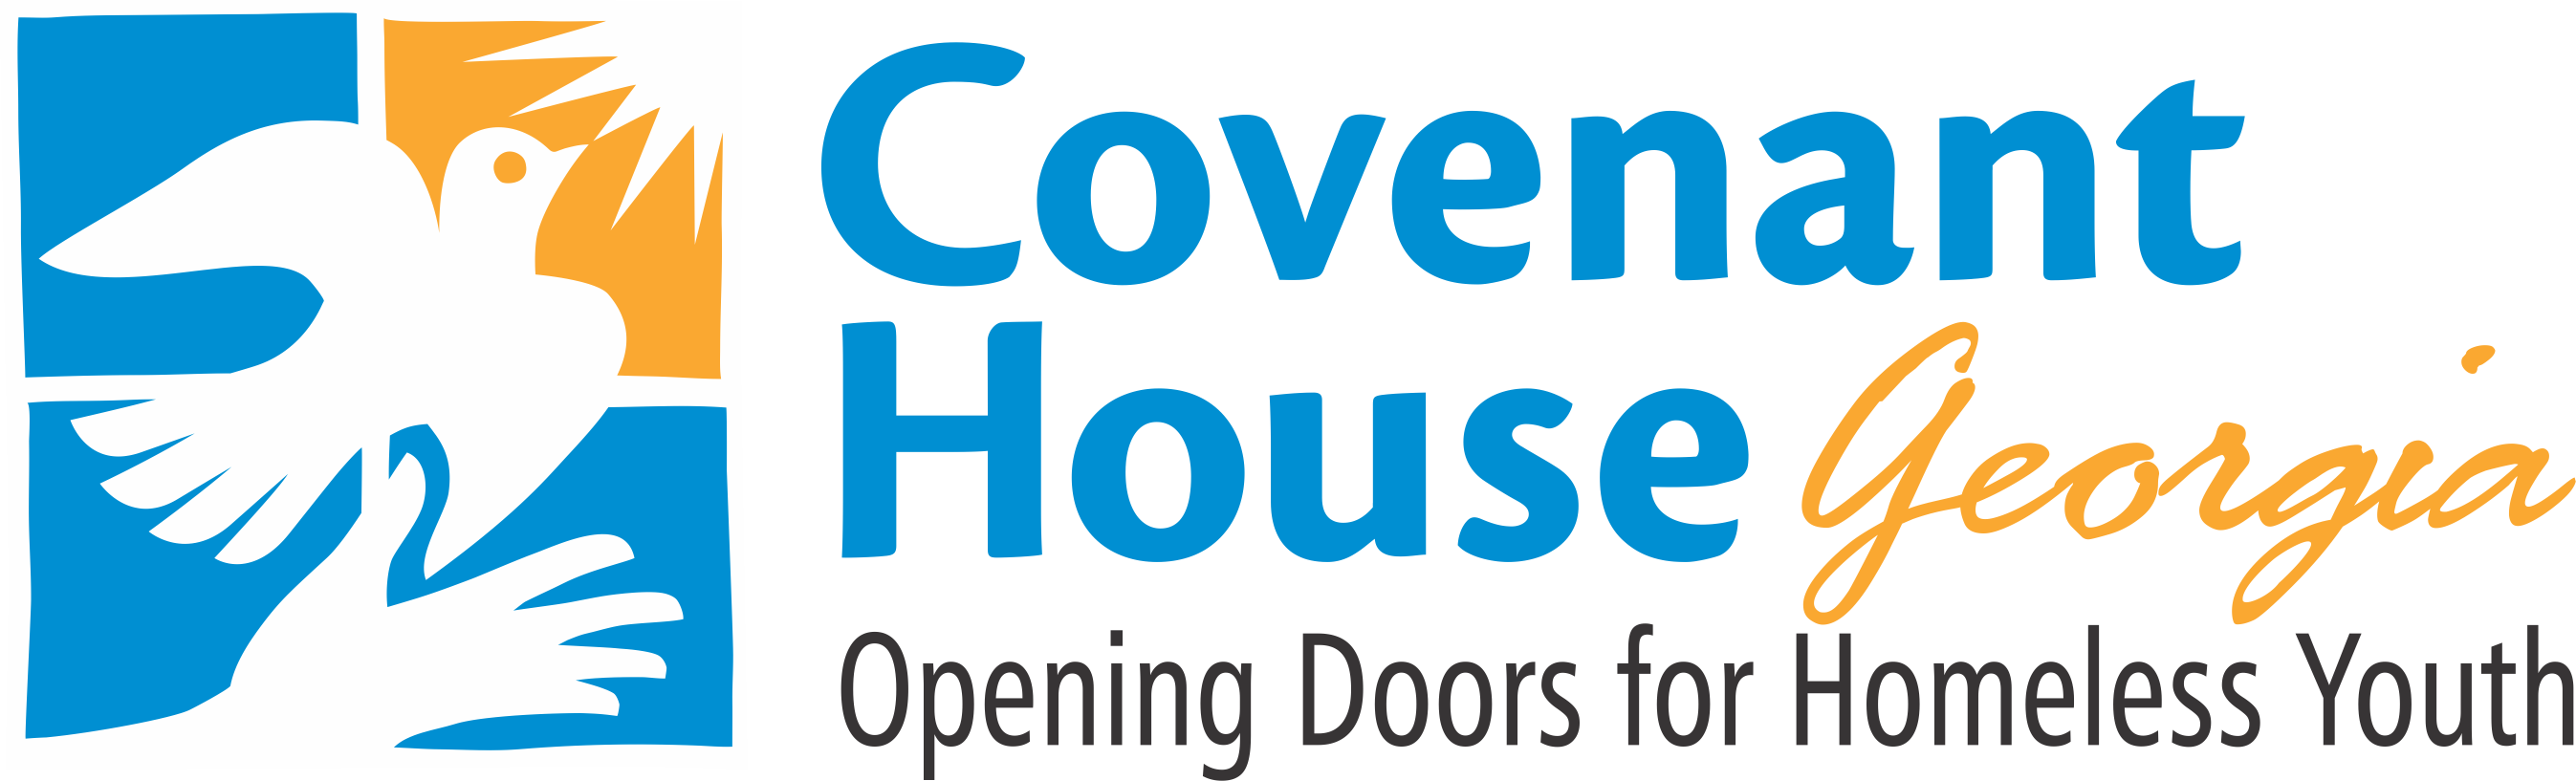 Covenant House Georgia is a full partner of Covenant House International, the largest privately funded agency in the United States providing shelter and services to homeless and at-risk youth.